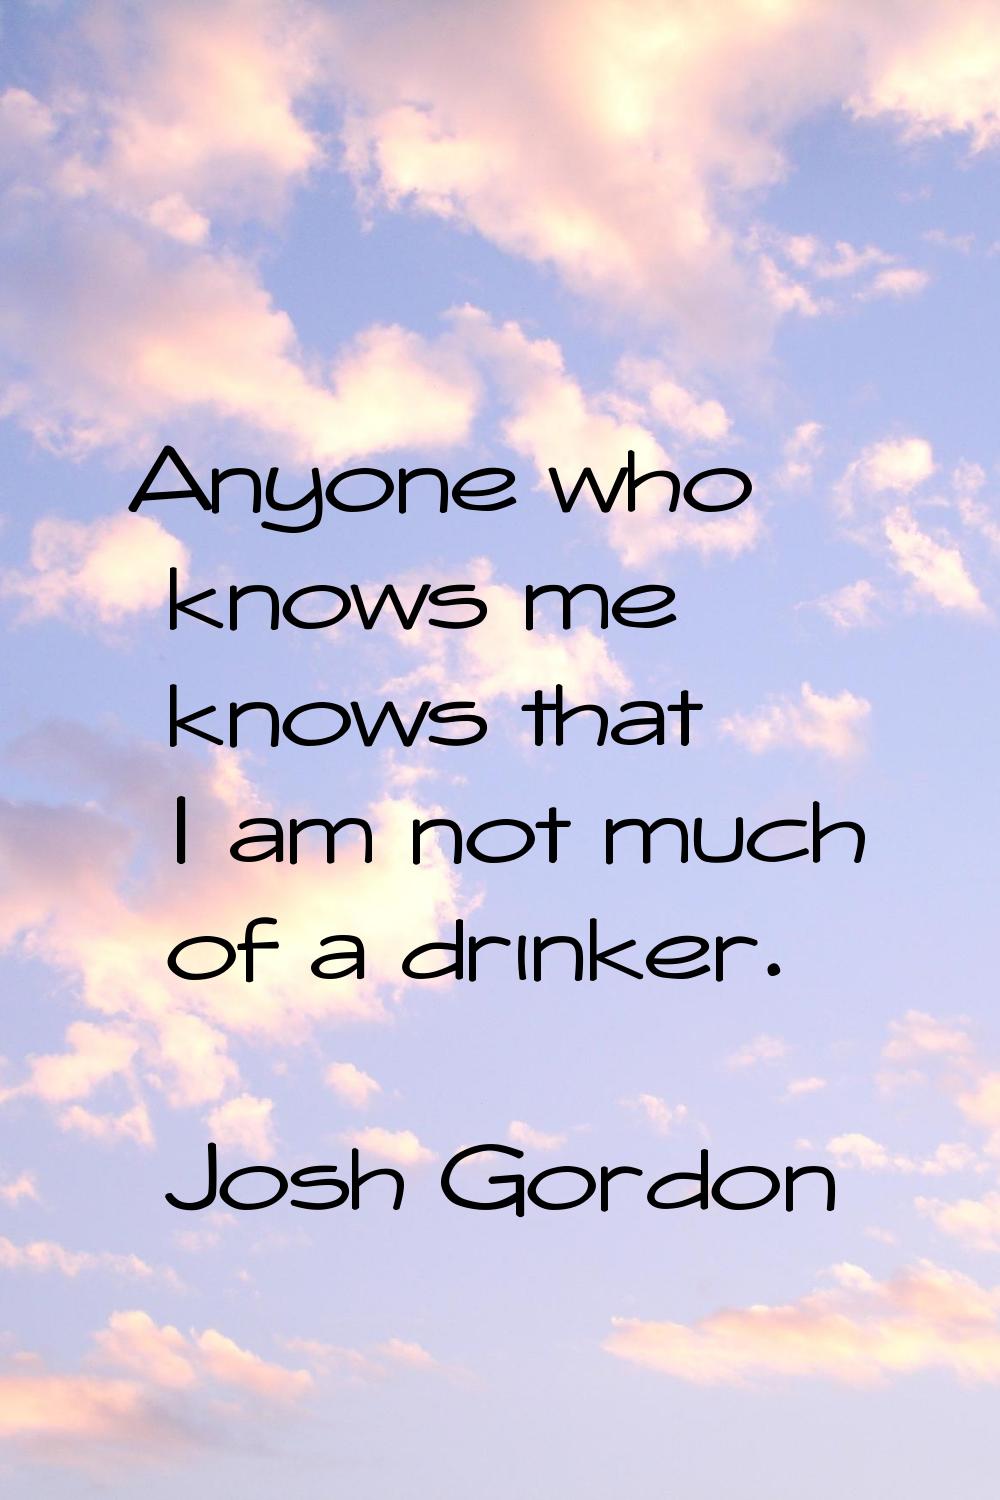 Anyone who knows me knows that I am not much of a drinker.